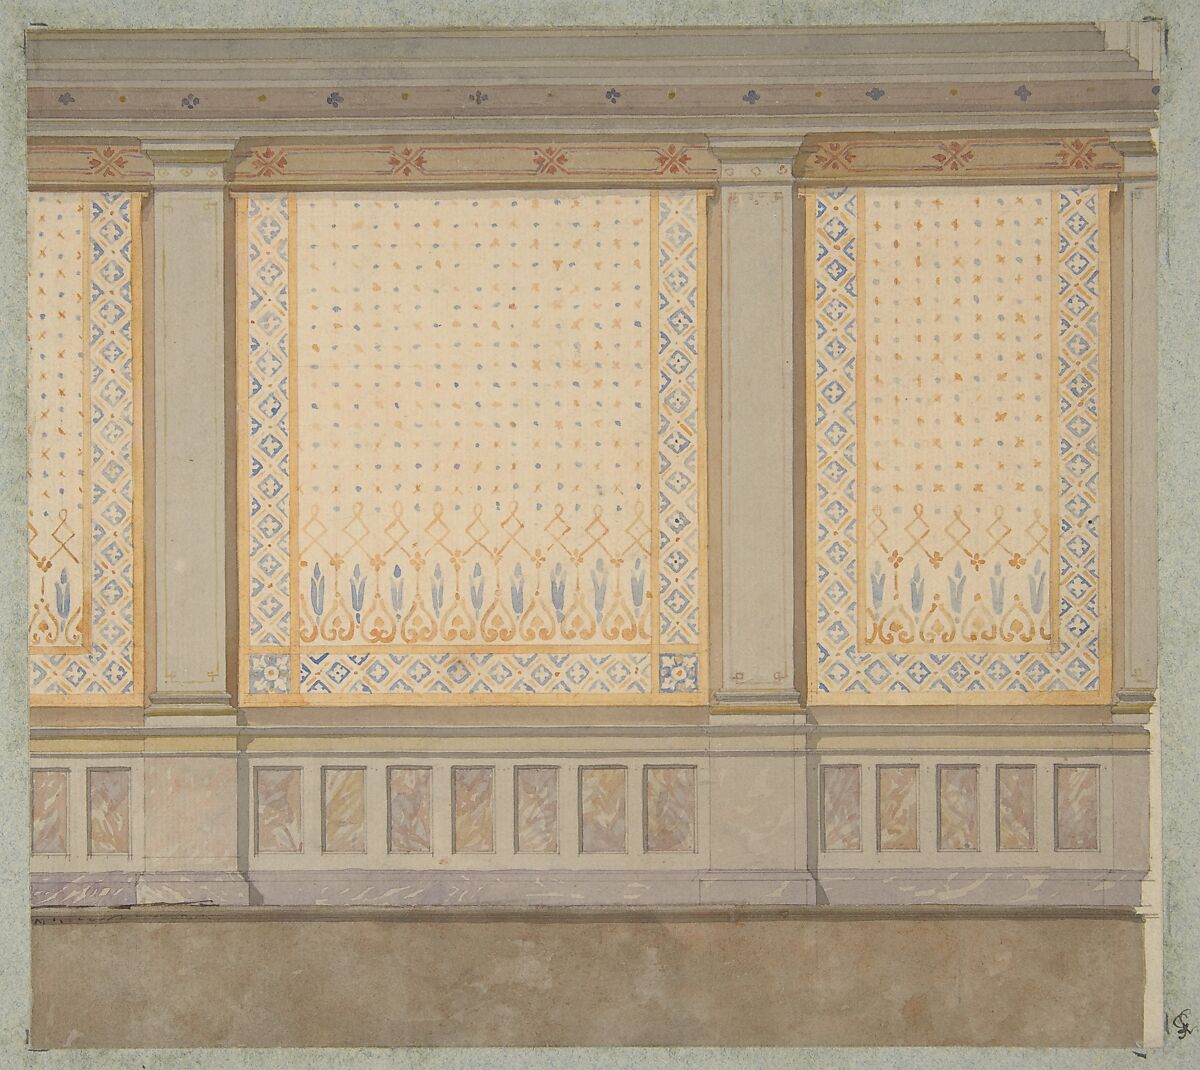 Design for decoration of a wall with painted panels separated by pilasters, Jules-Edmond-Charles Lachaise (French, died 1897), graphite and watercolor on laid paper 